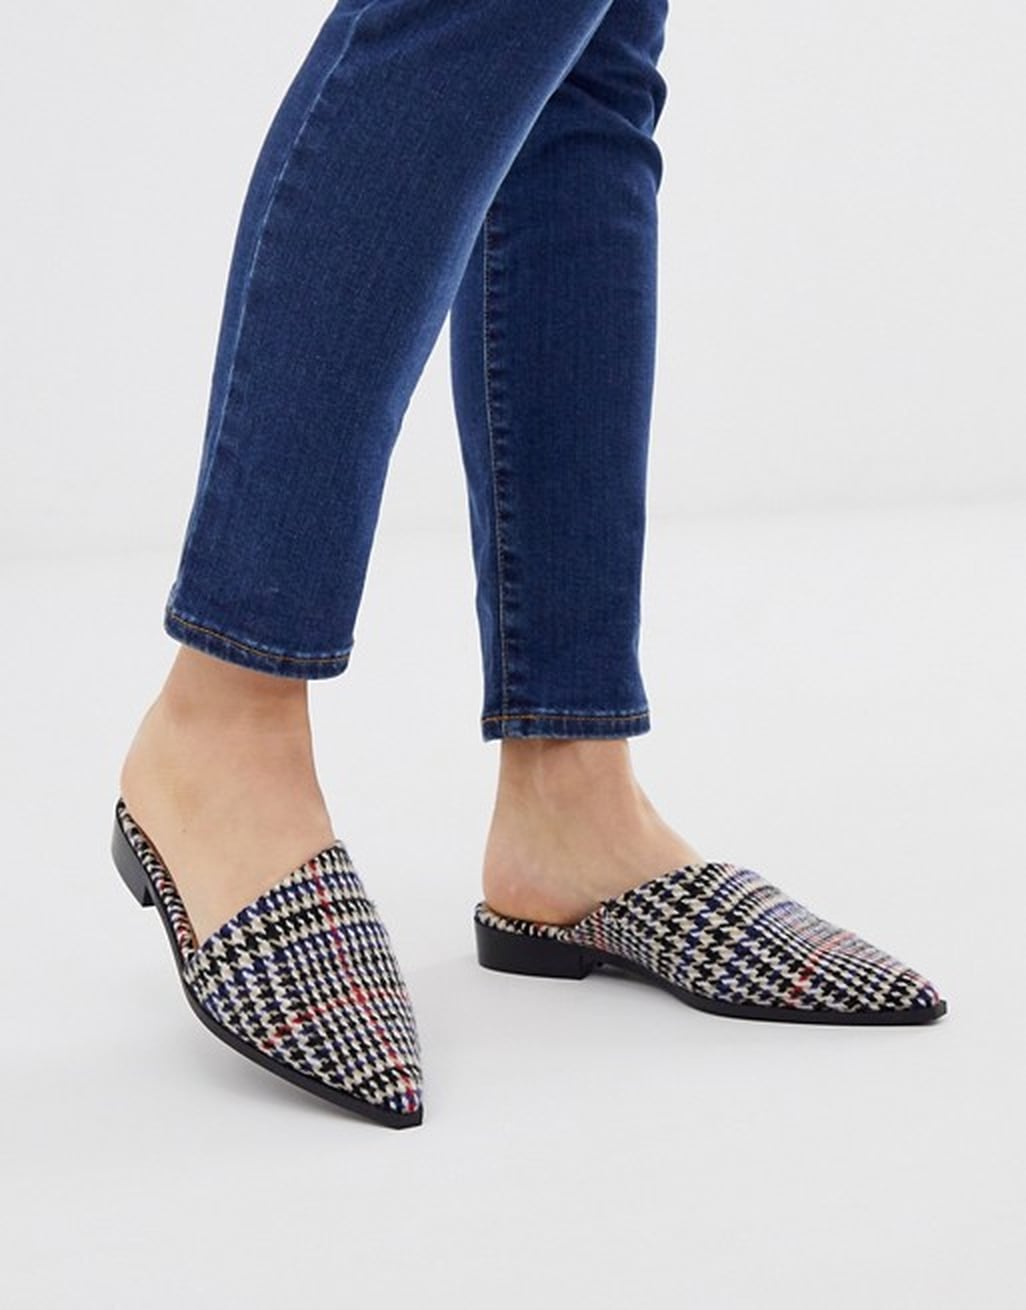 Shop the Best Fall Shoes of 2019 Under $50 | POPSUGAR Fashion